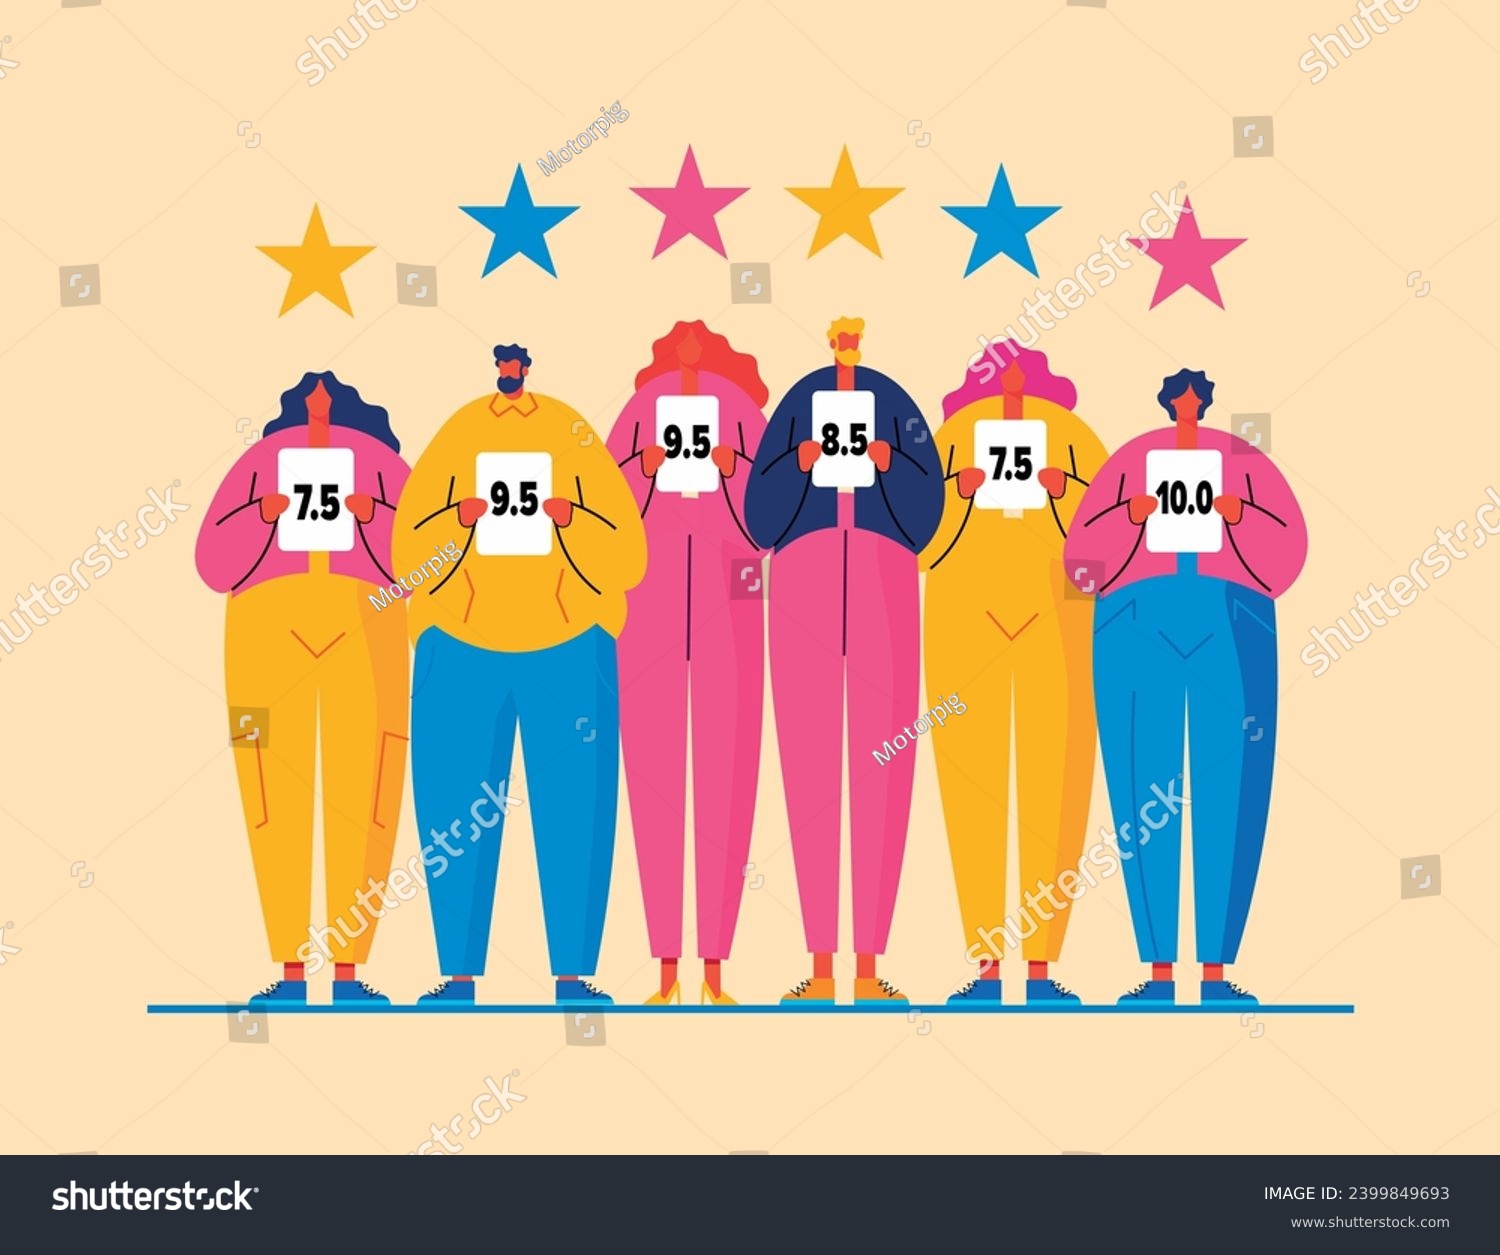 Group of cartoon colorful people holding score cards with numbers, stars above them. Contest jury, voting concept, customer feedback web page banner. Vector #2399849693